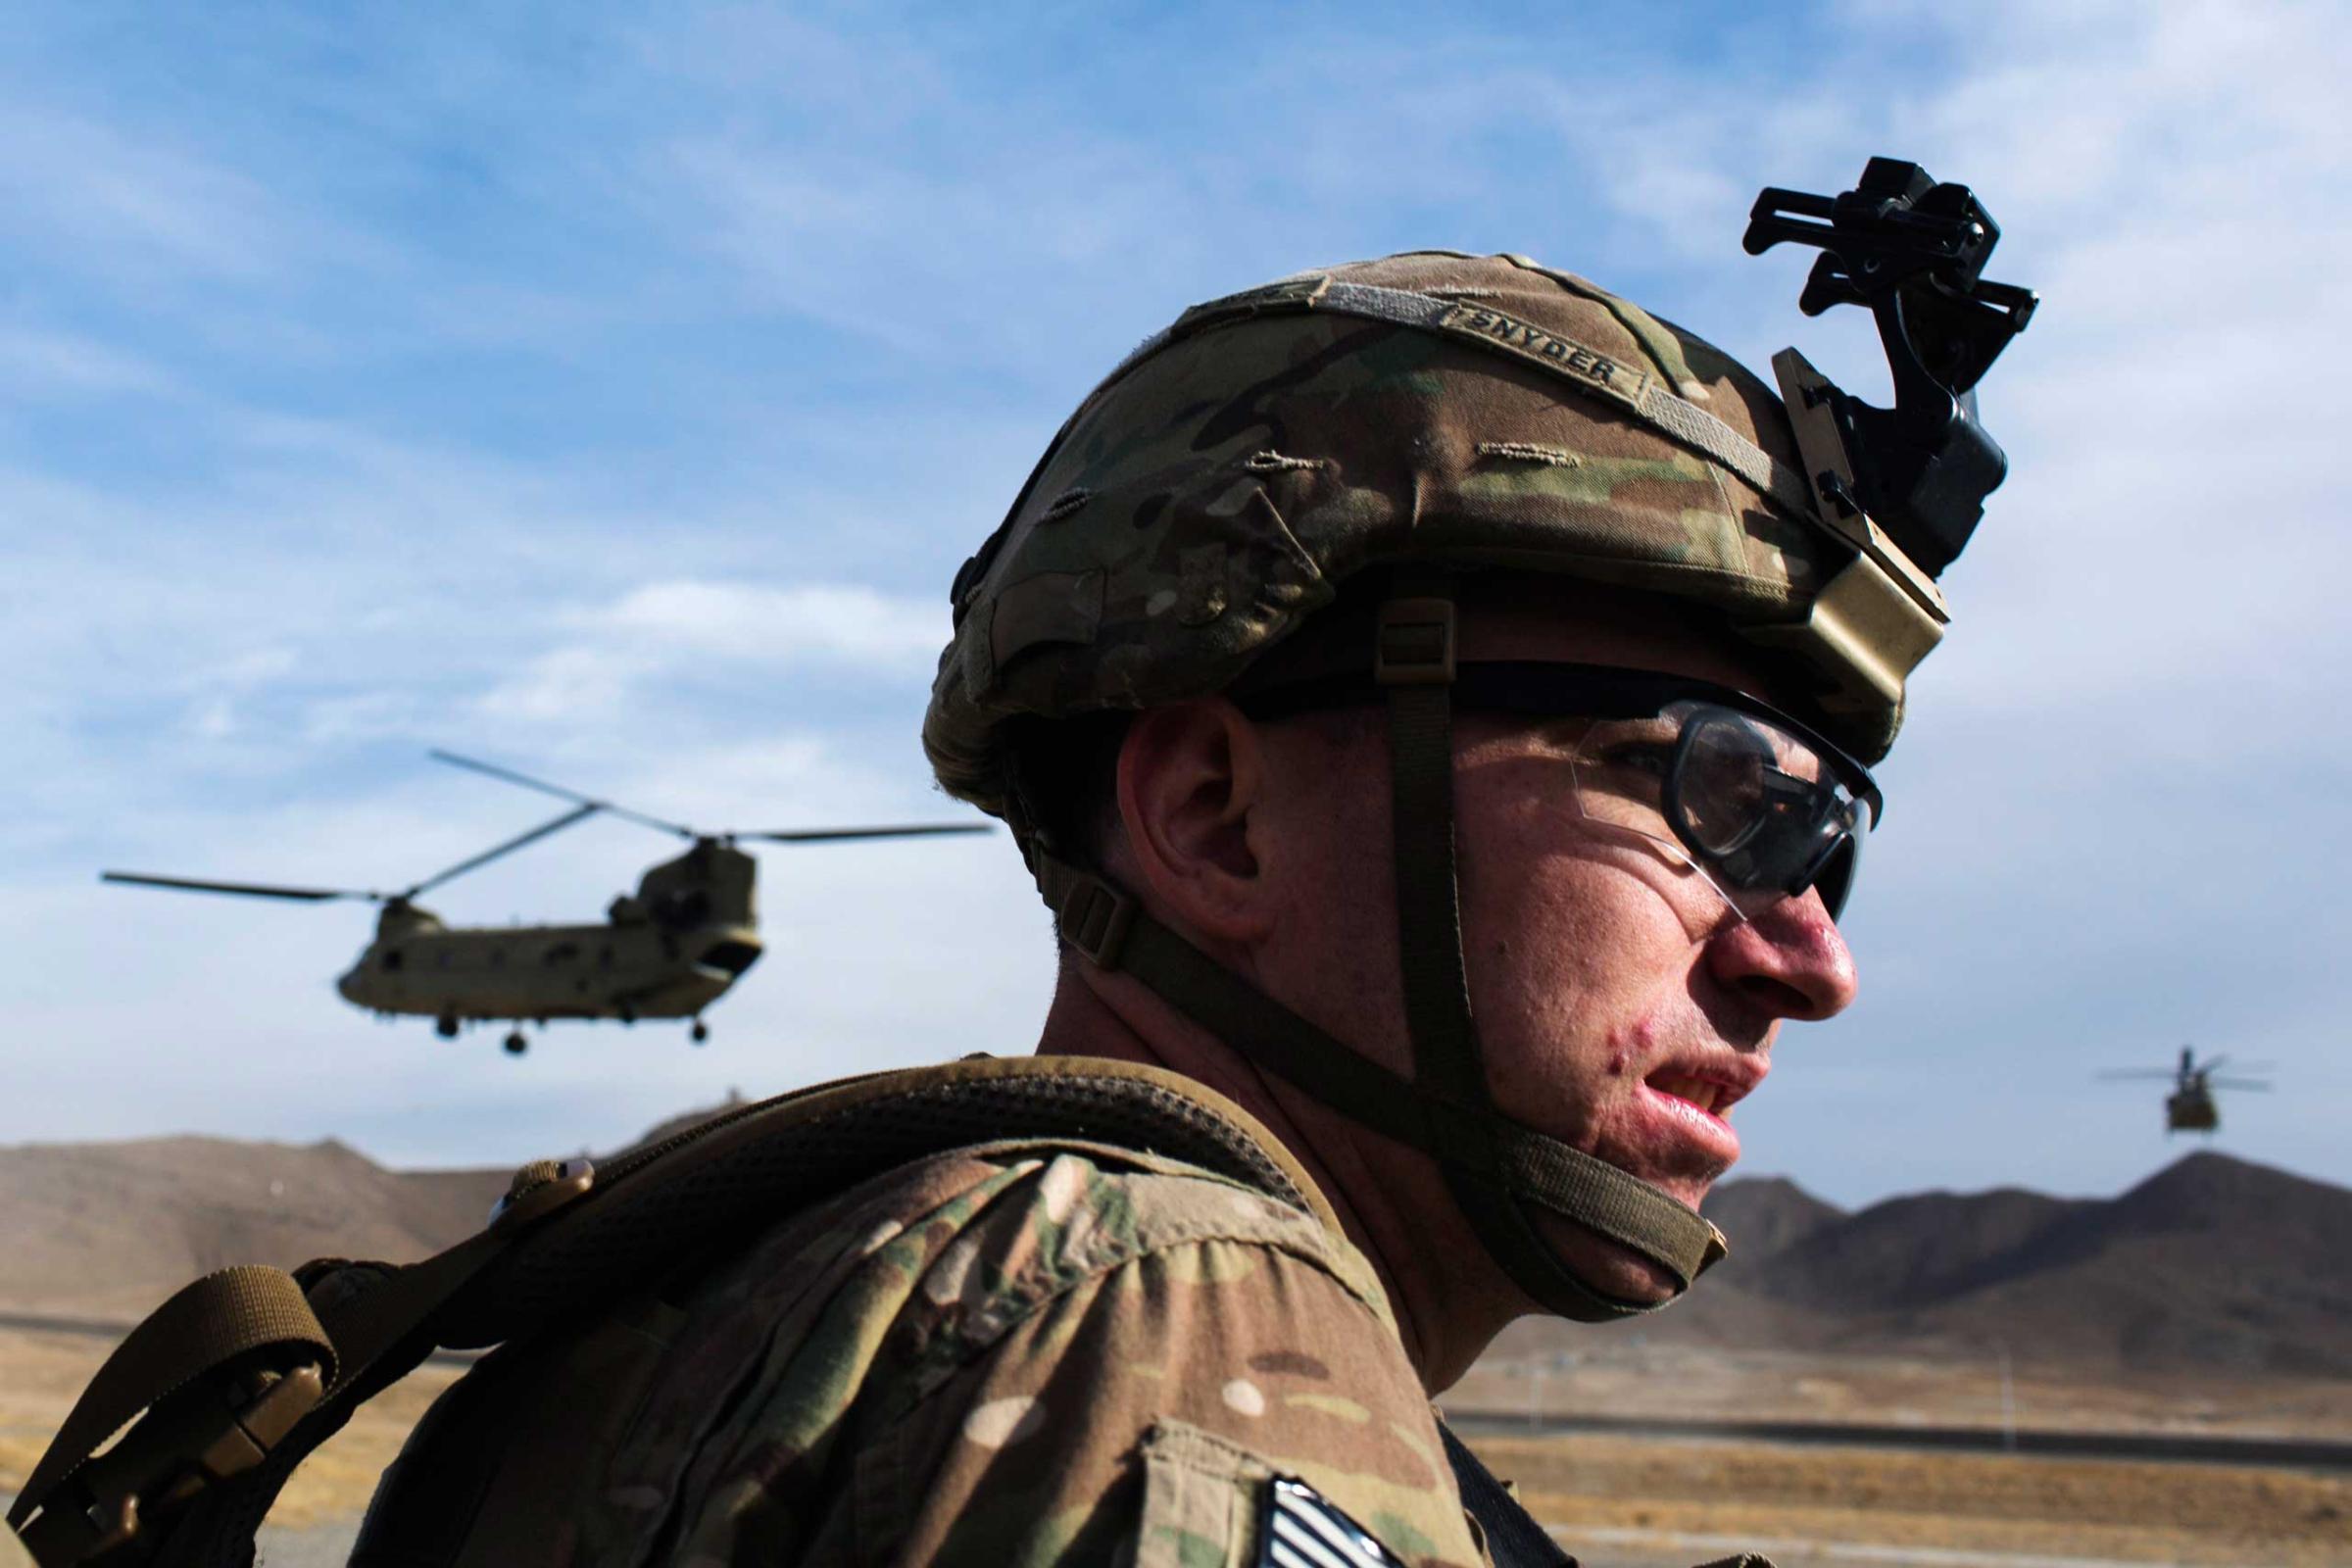 A U.S. soldier waits for a CH-47 Chinook helicopter from the 82nd Combat Aviation Brigade to land after an advising mission at the Afghan National Army headquarters for the 203rd Corps in the Paktia province of Afghanistan